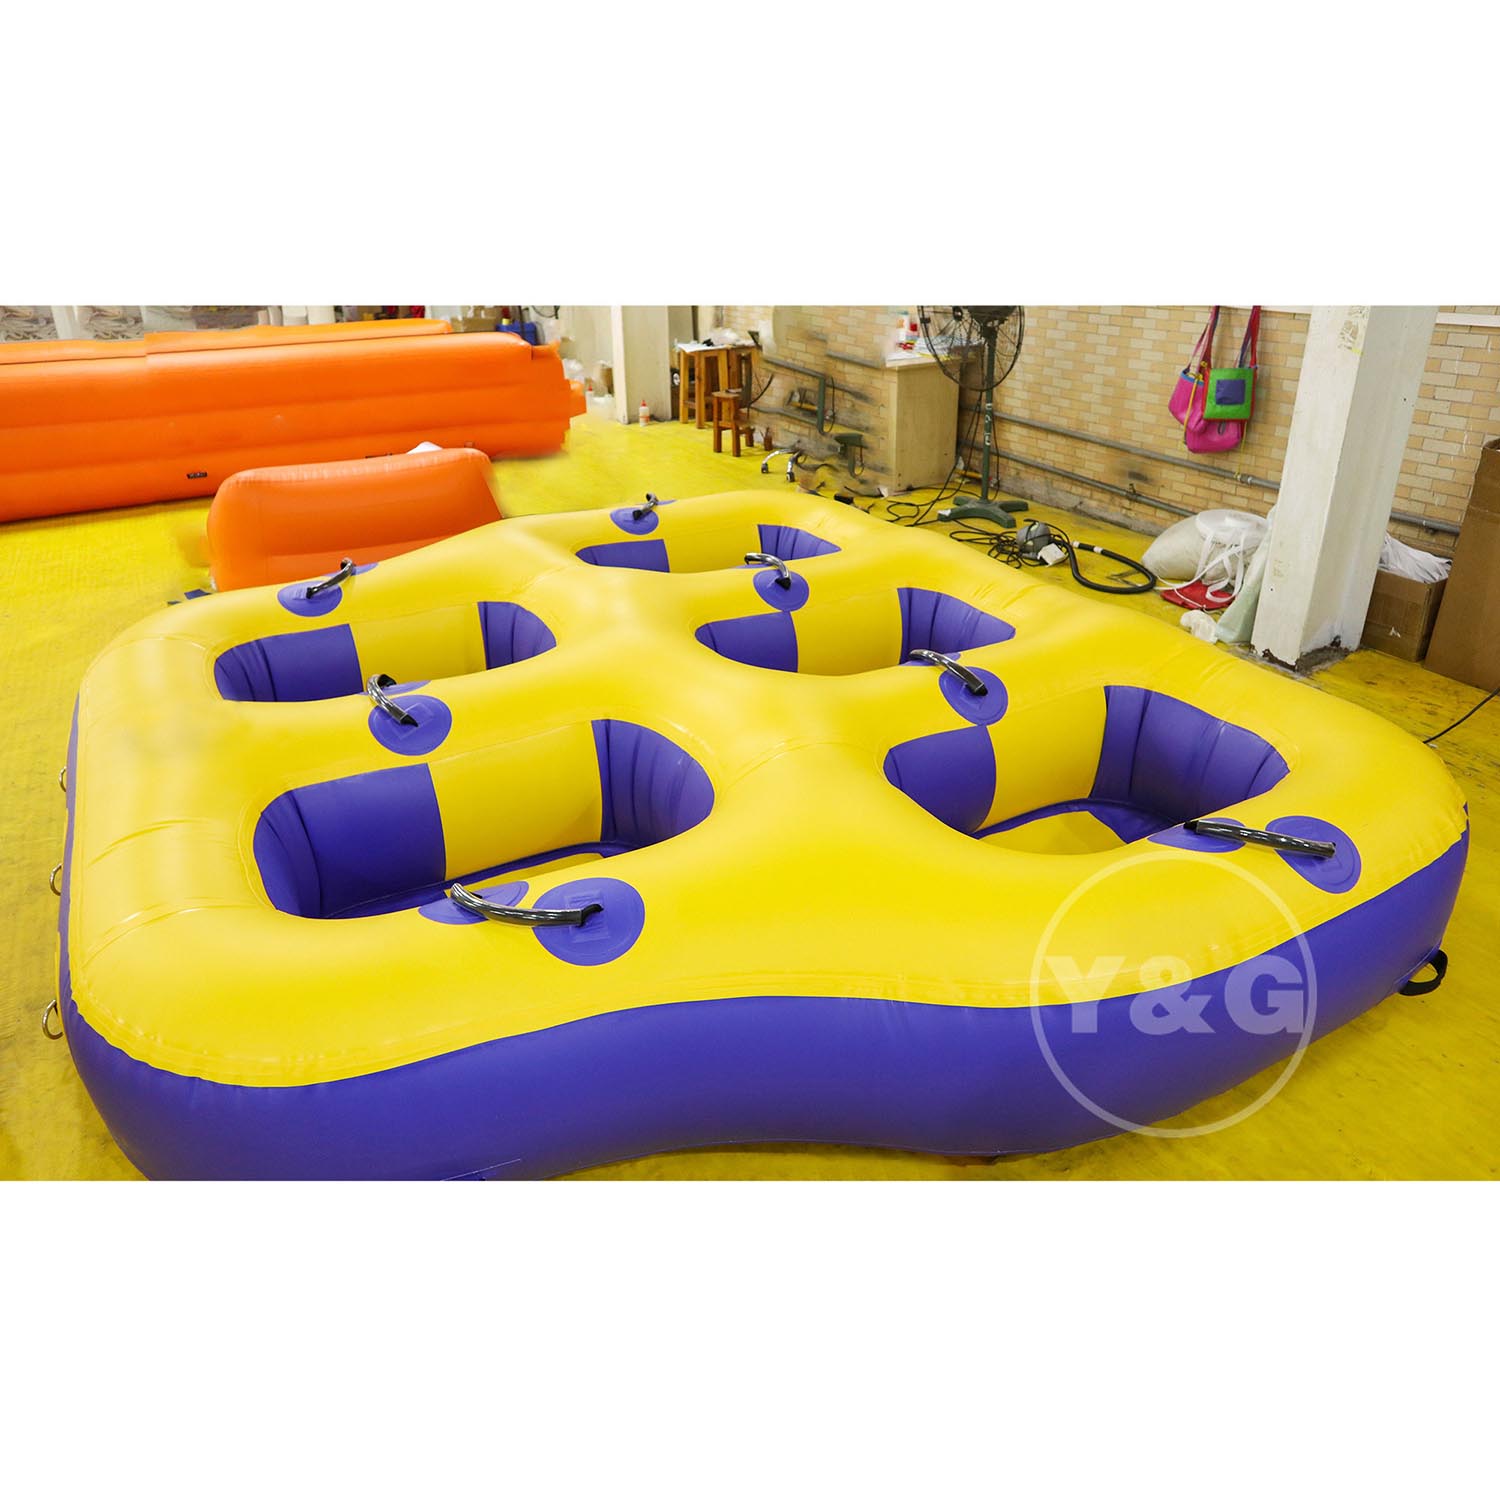 Yellow Inflatable Donut Boat12